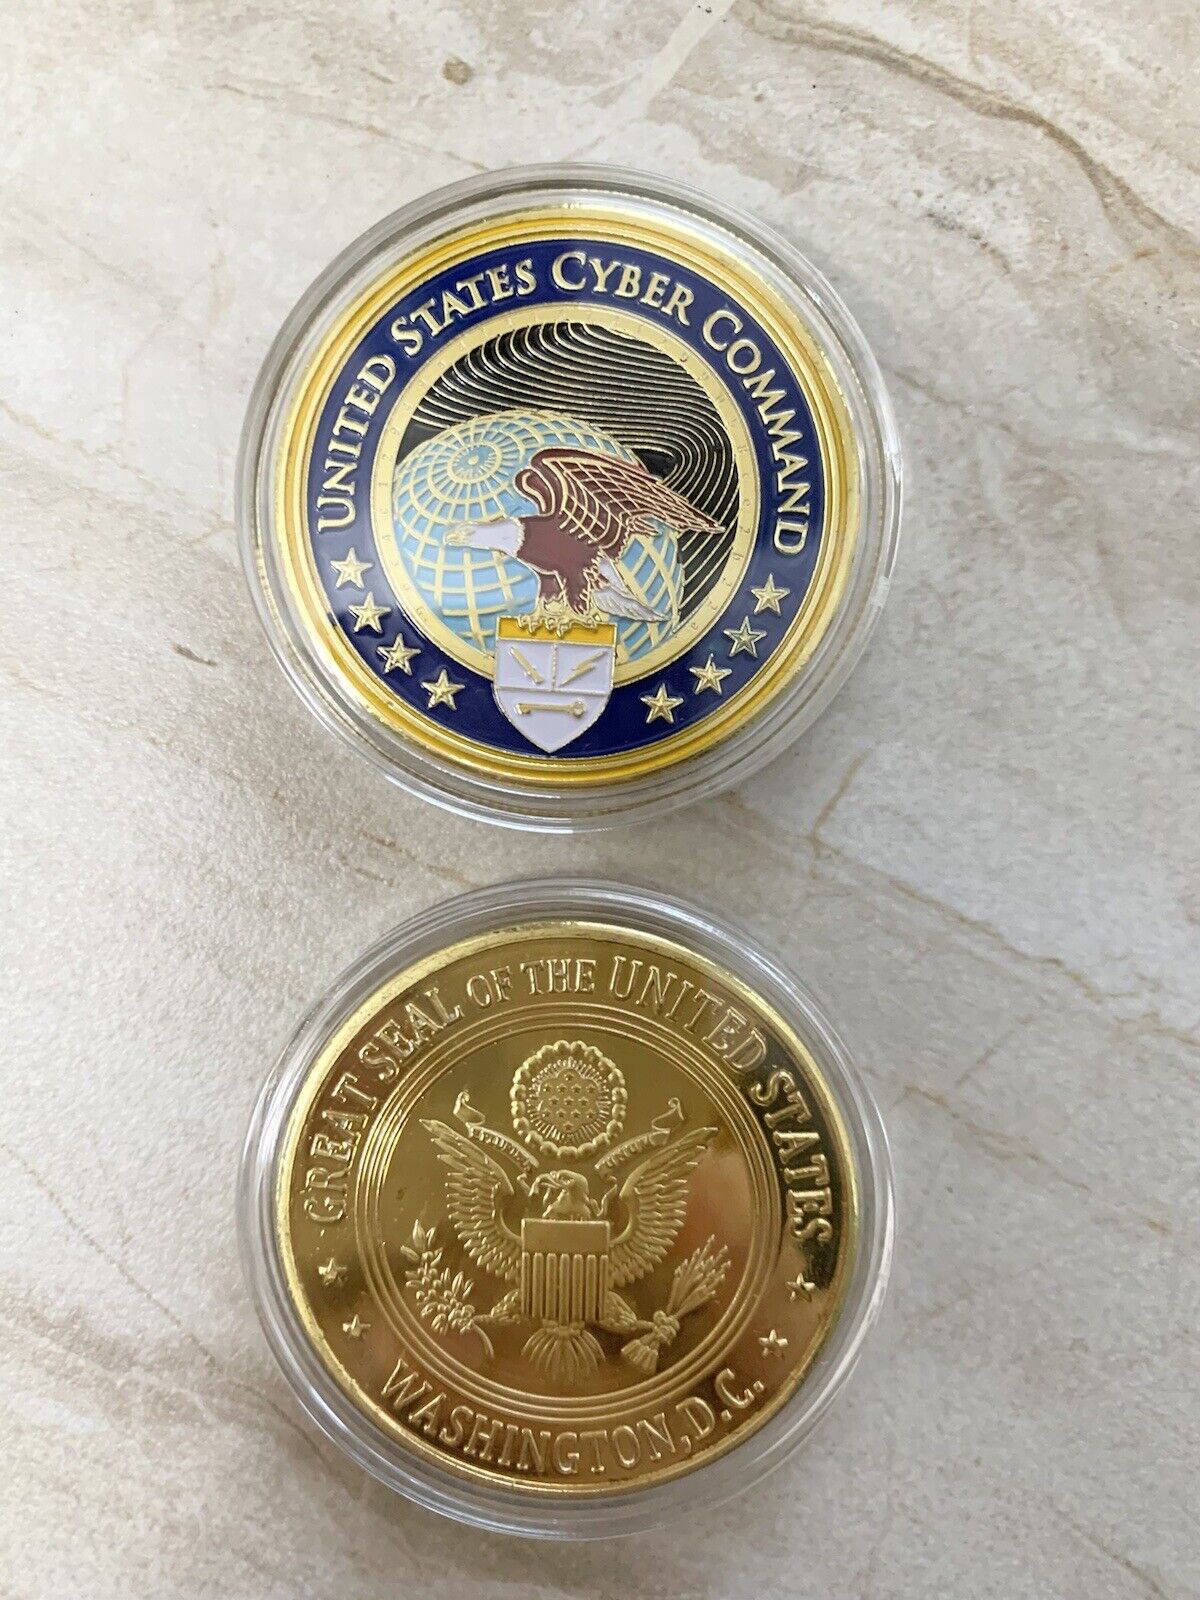 US CYBER COMMAND-Department of Defense Challenge Coin USCYBERCOM